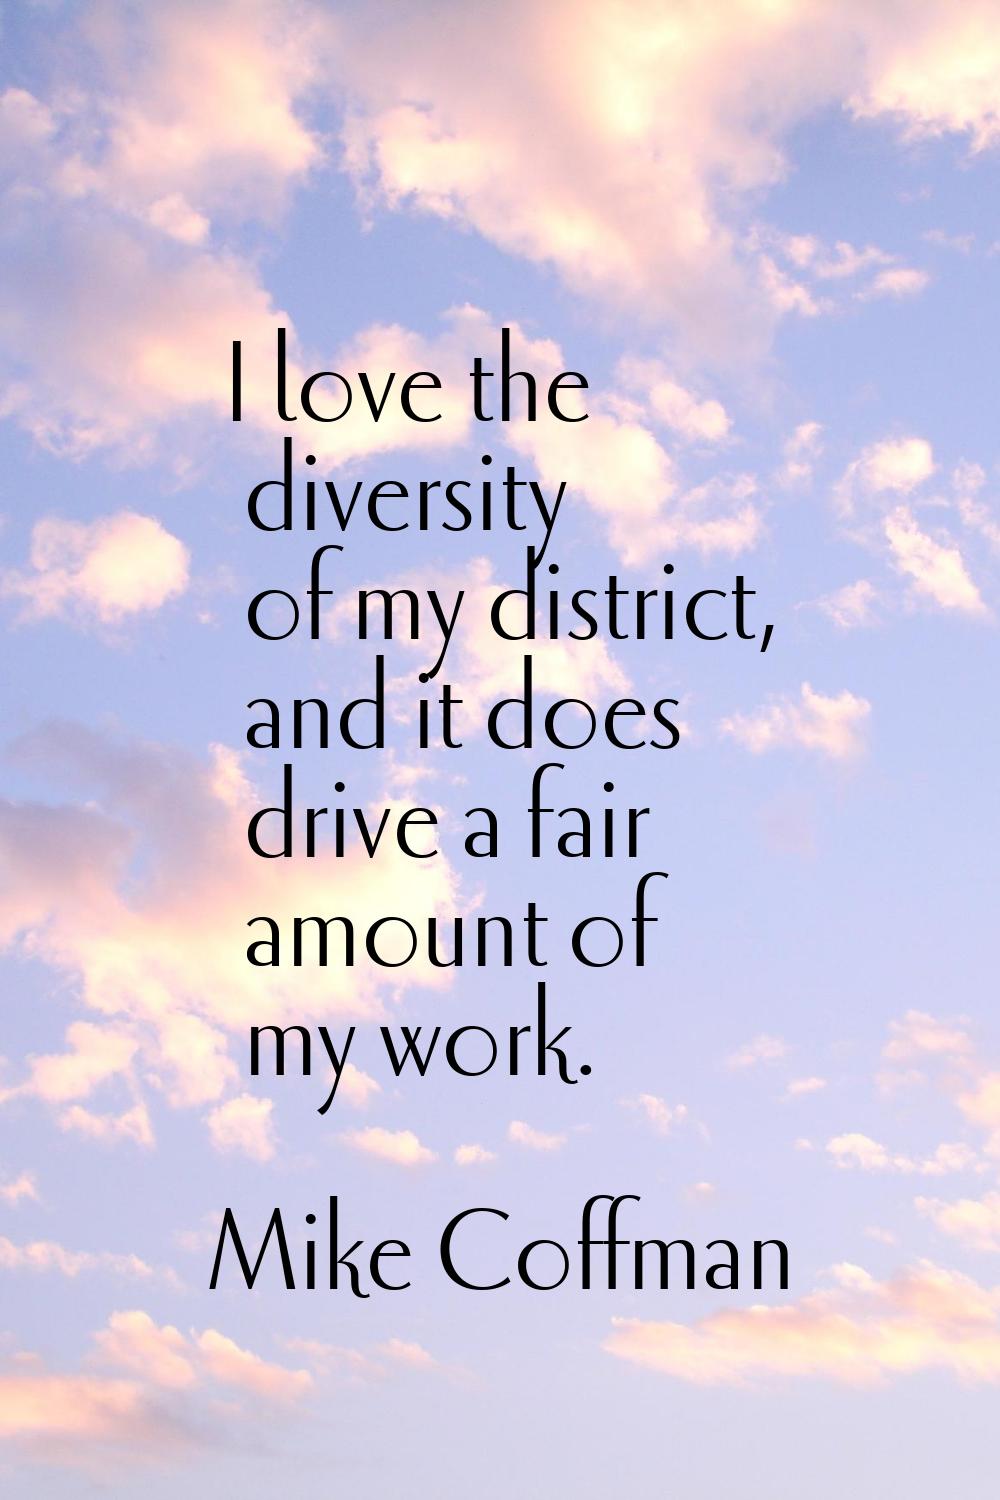 I love the diversity of my district, and it does drive a fair amount of my work.